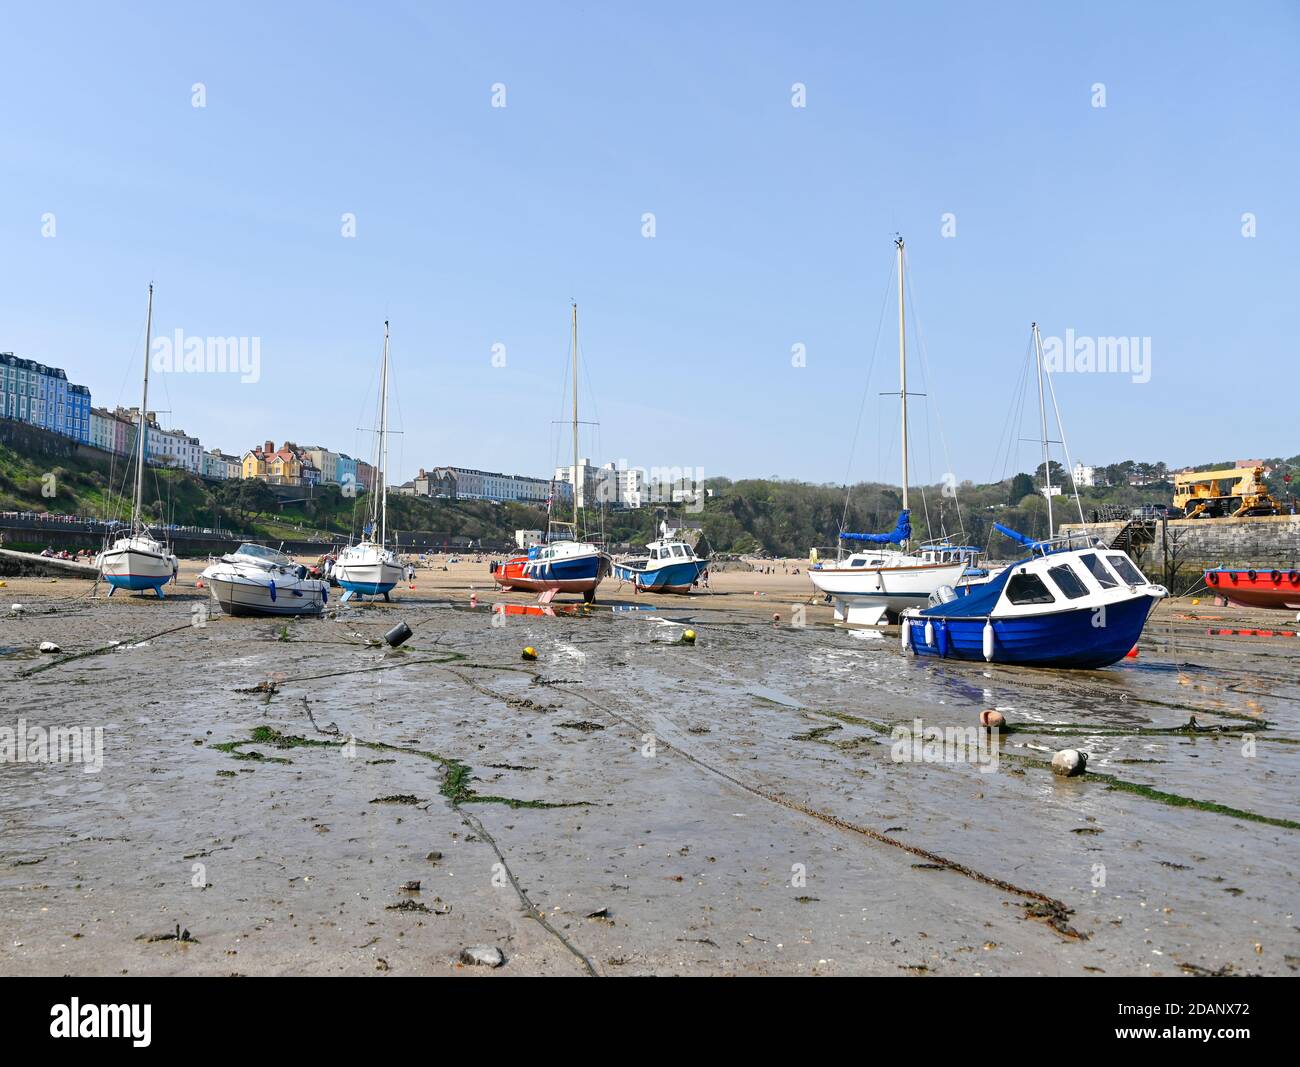 Tenby, Wales - April 15 2019 : The boats in the harbour at Tenby at low tide showing the mooring chains Stock Photo